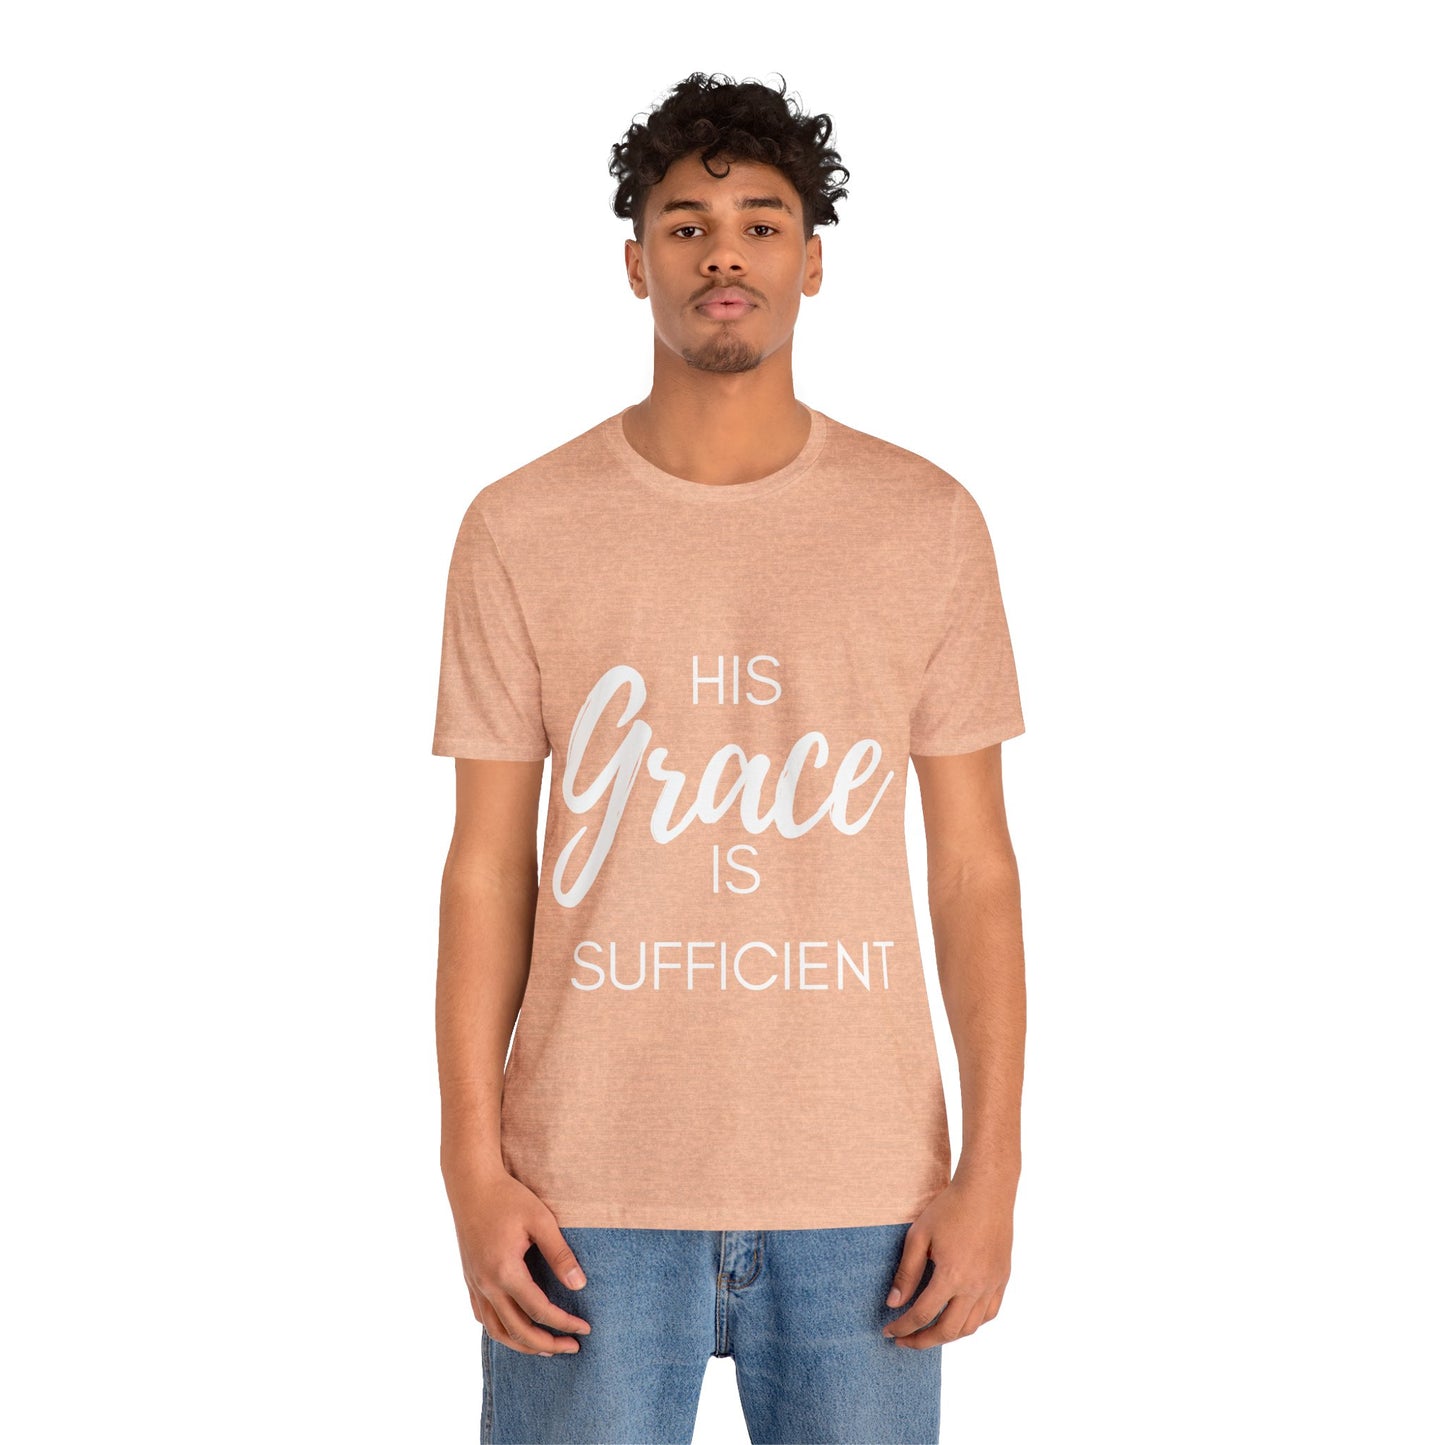 His Grace Is Sufficient T-Shirt